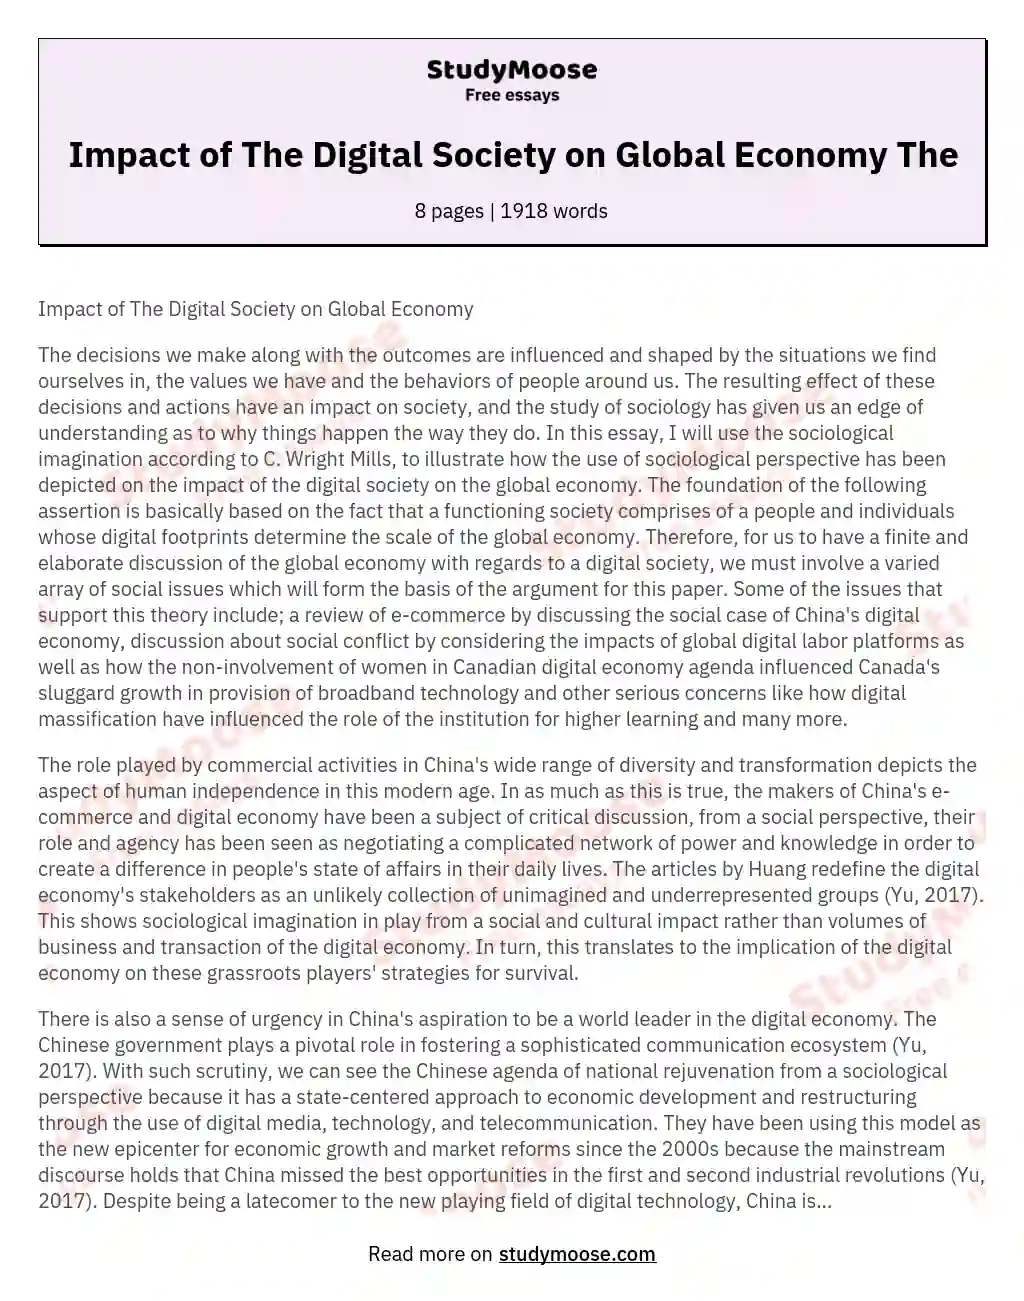 Impact of The Digital Society on Global Economy The essay